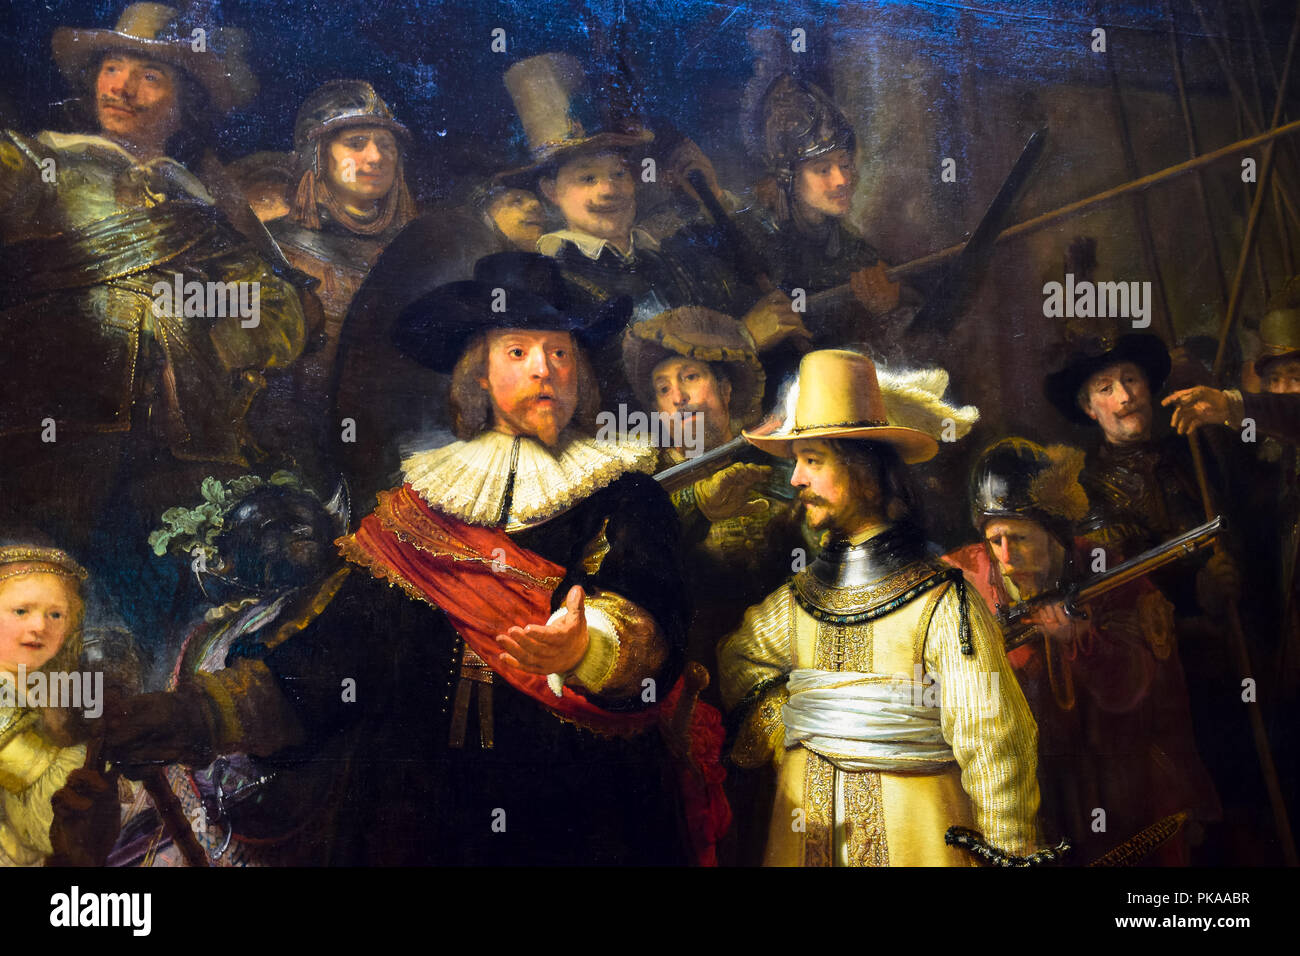 The iconic masterwork 'The Night Watch' by Rembrandt Van Rijn in the Rijksmuseum in Amsterdam, Netherlands Stock Photo